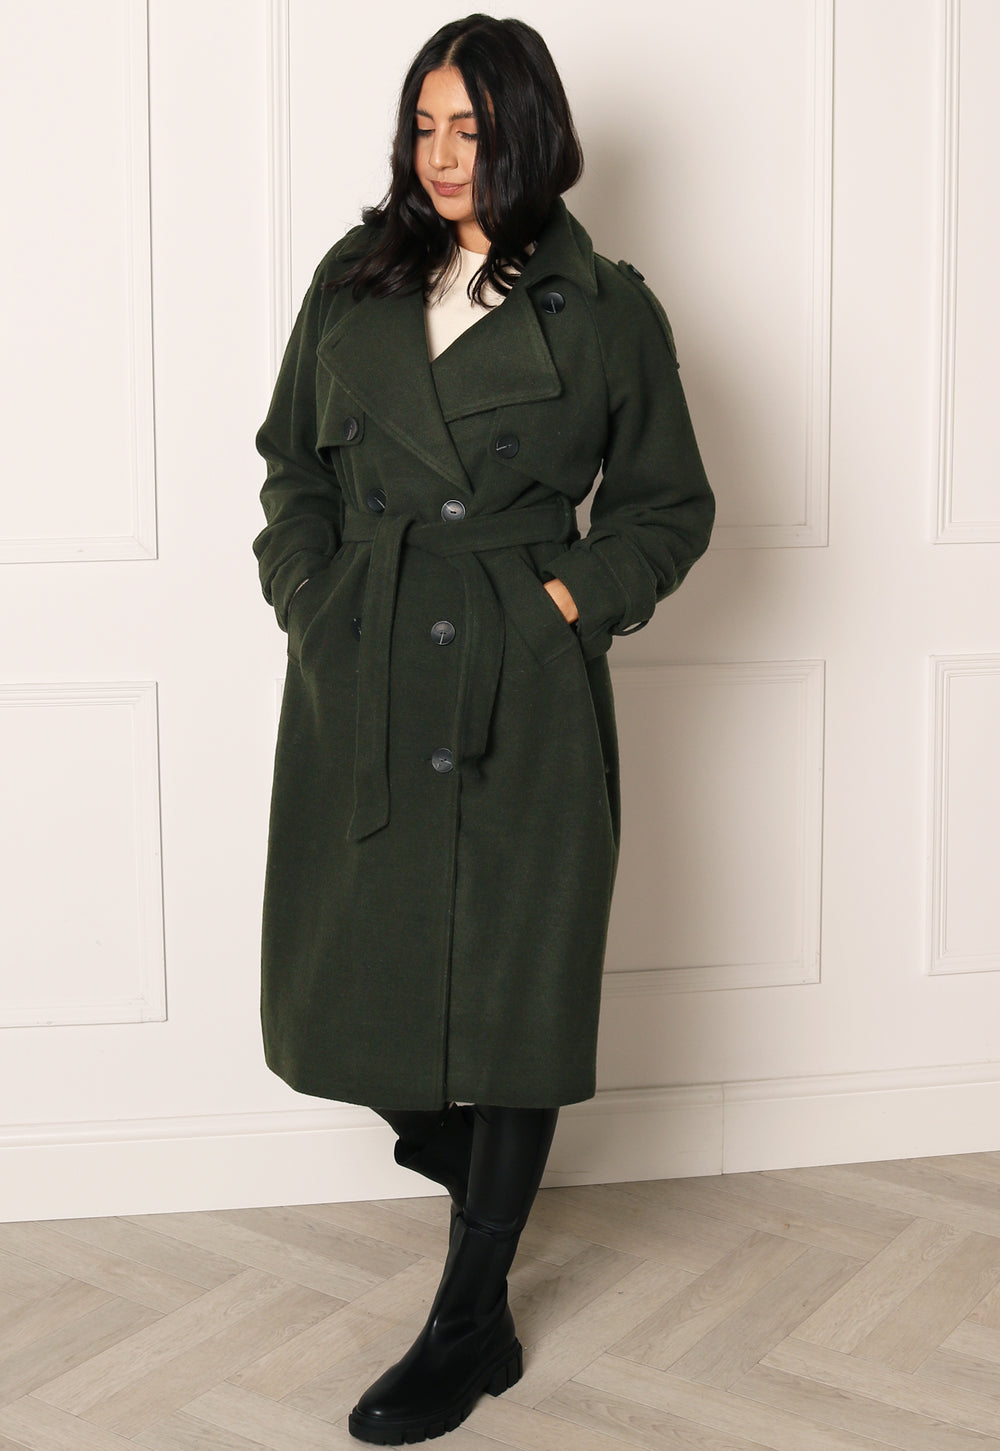 ONLY Alvina Smart Double Breasted Longline Wool Trench Coat in Dark Khaki - One Nation Clothing